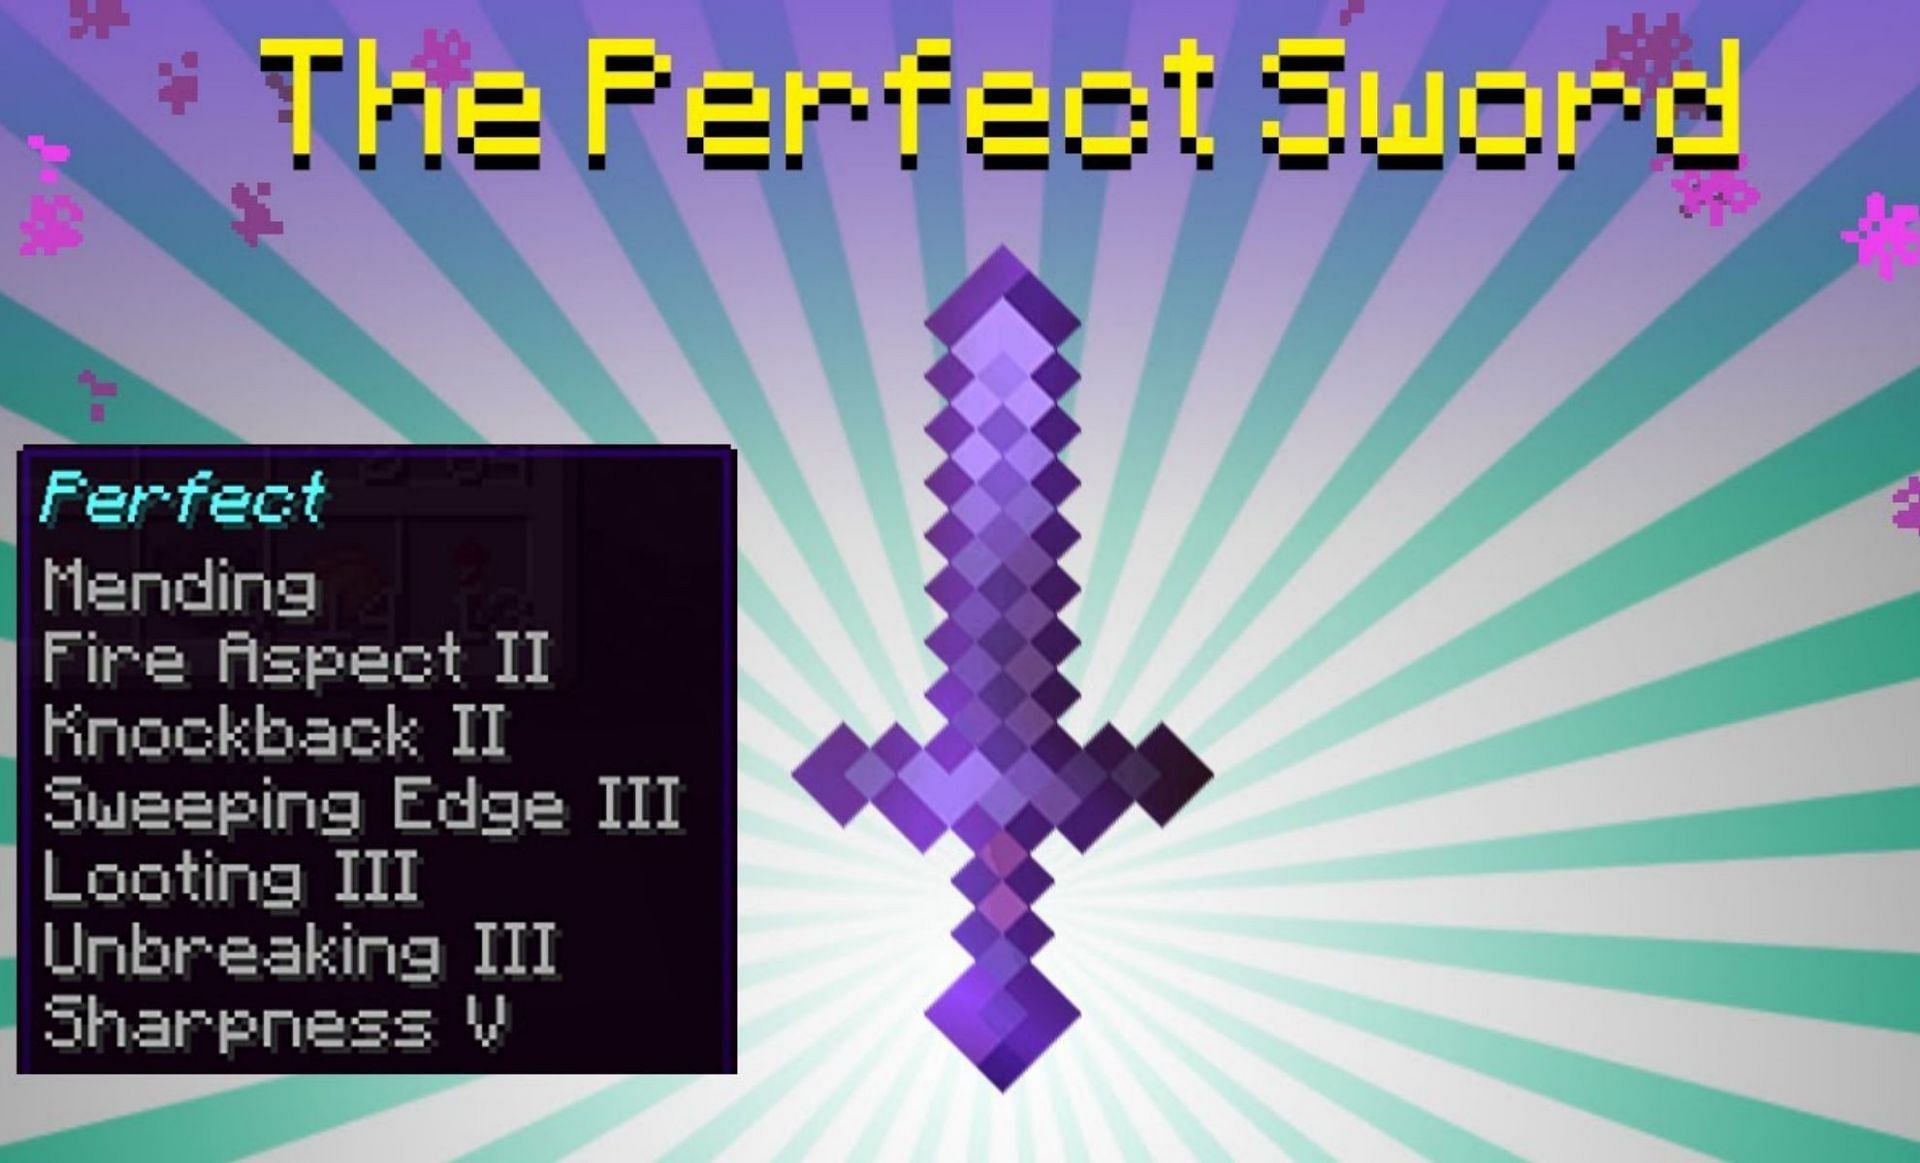 More Sword Enchantment for Minecraft Pocket Edition 1.16